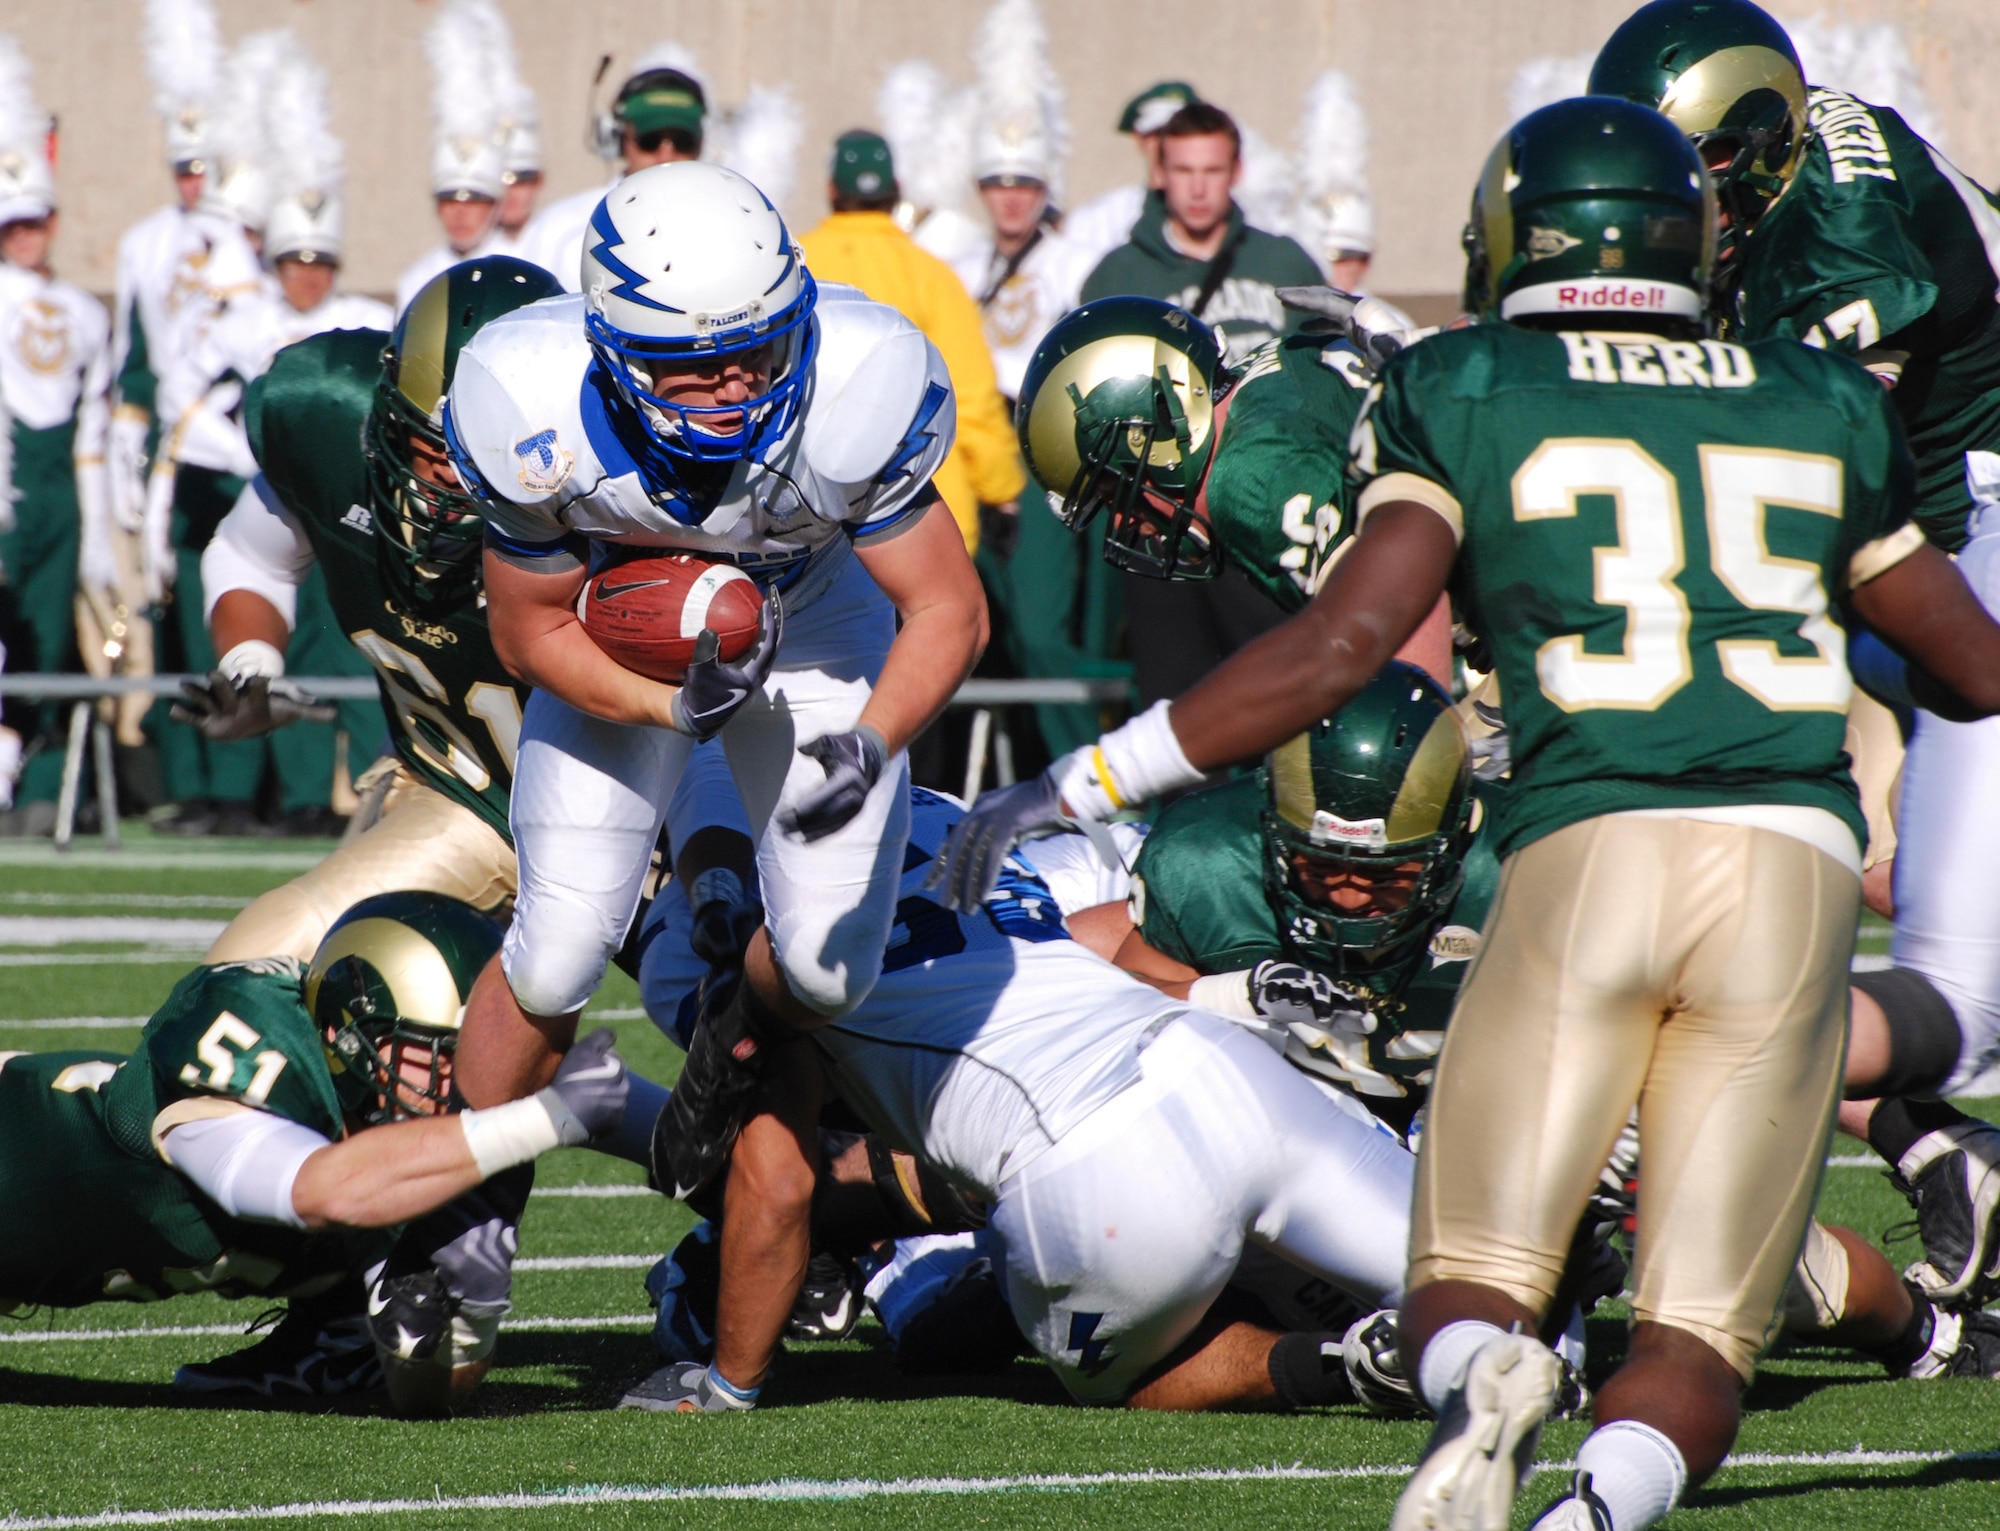 Falcons fullback Jared Tew bulls his way through the CSU defense for a gain. Tew was a mainstay of the Air Force Academy rushing game, carrying the ball for 20 of the Falcons' 59 rushing attempts, in a 34-16 win over CSU Oct. 31, 2009. (U.S. Air Force photo/Denise Navoy)